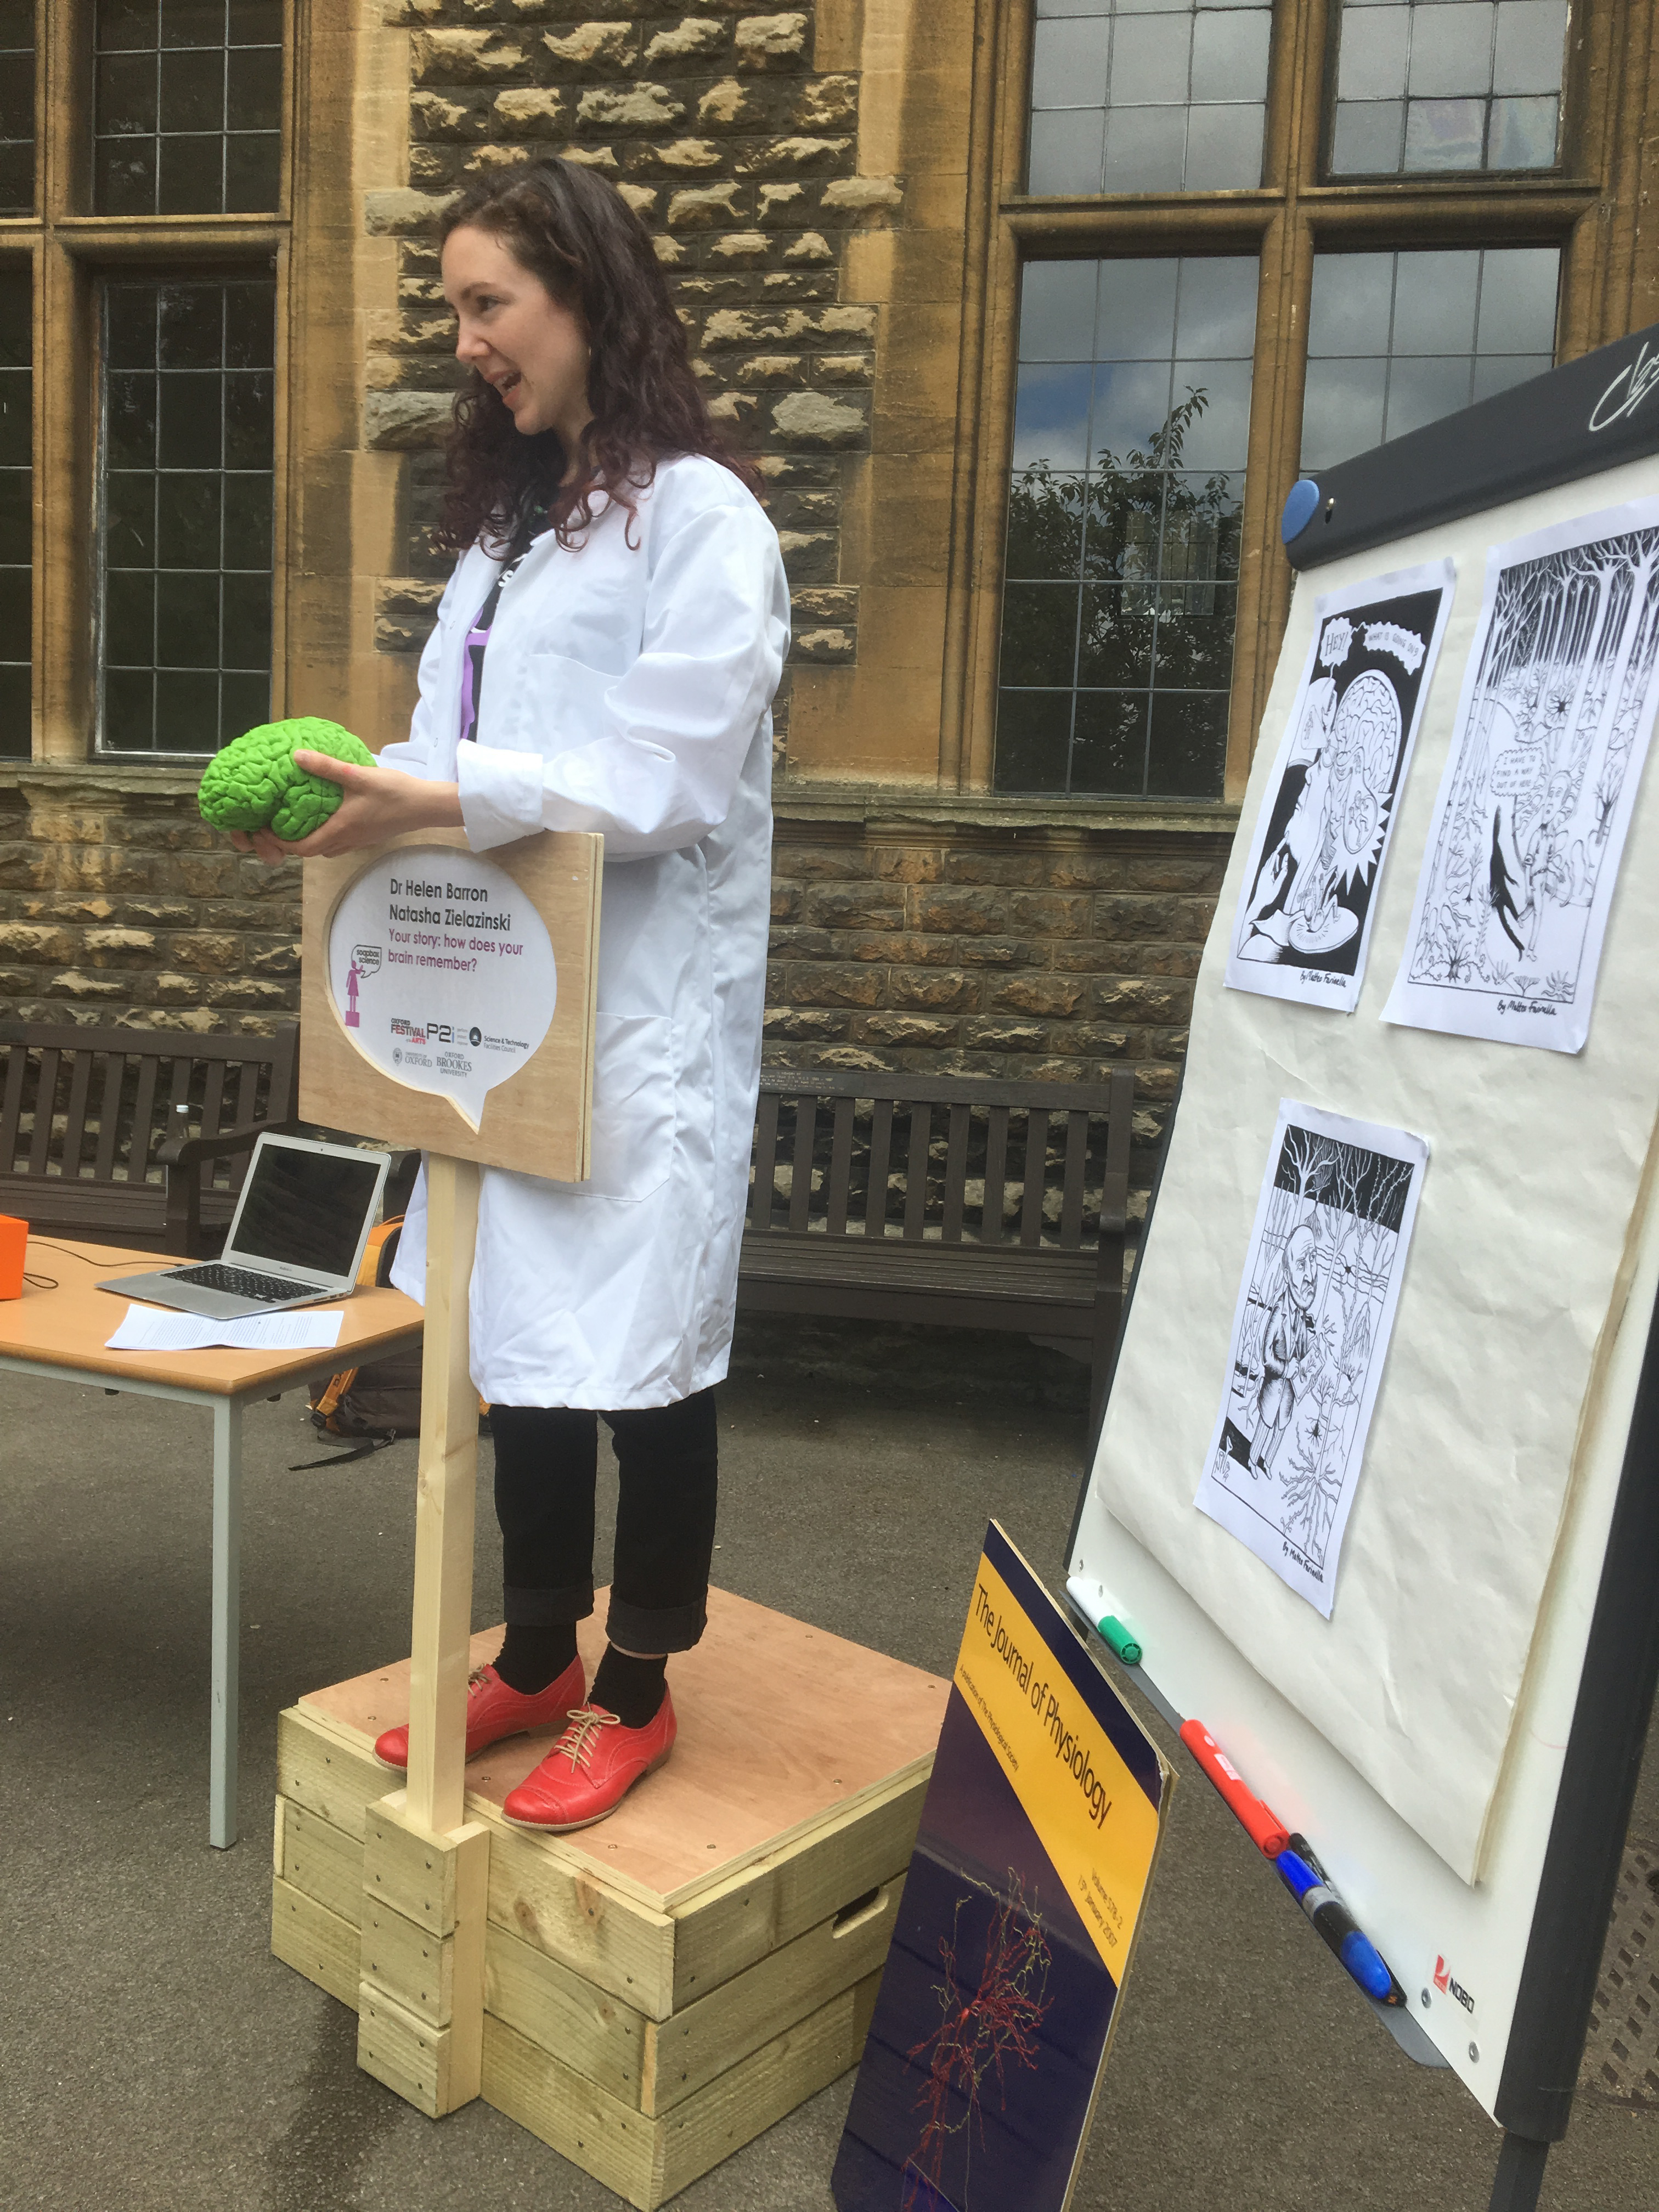 Unit scientist Helen Barron in action on top of a soap box!